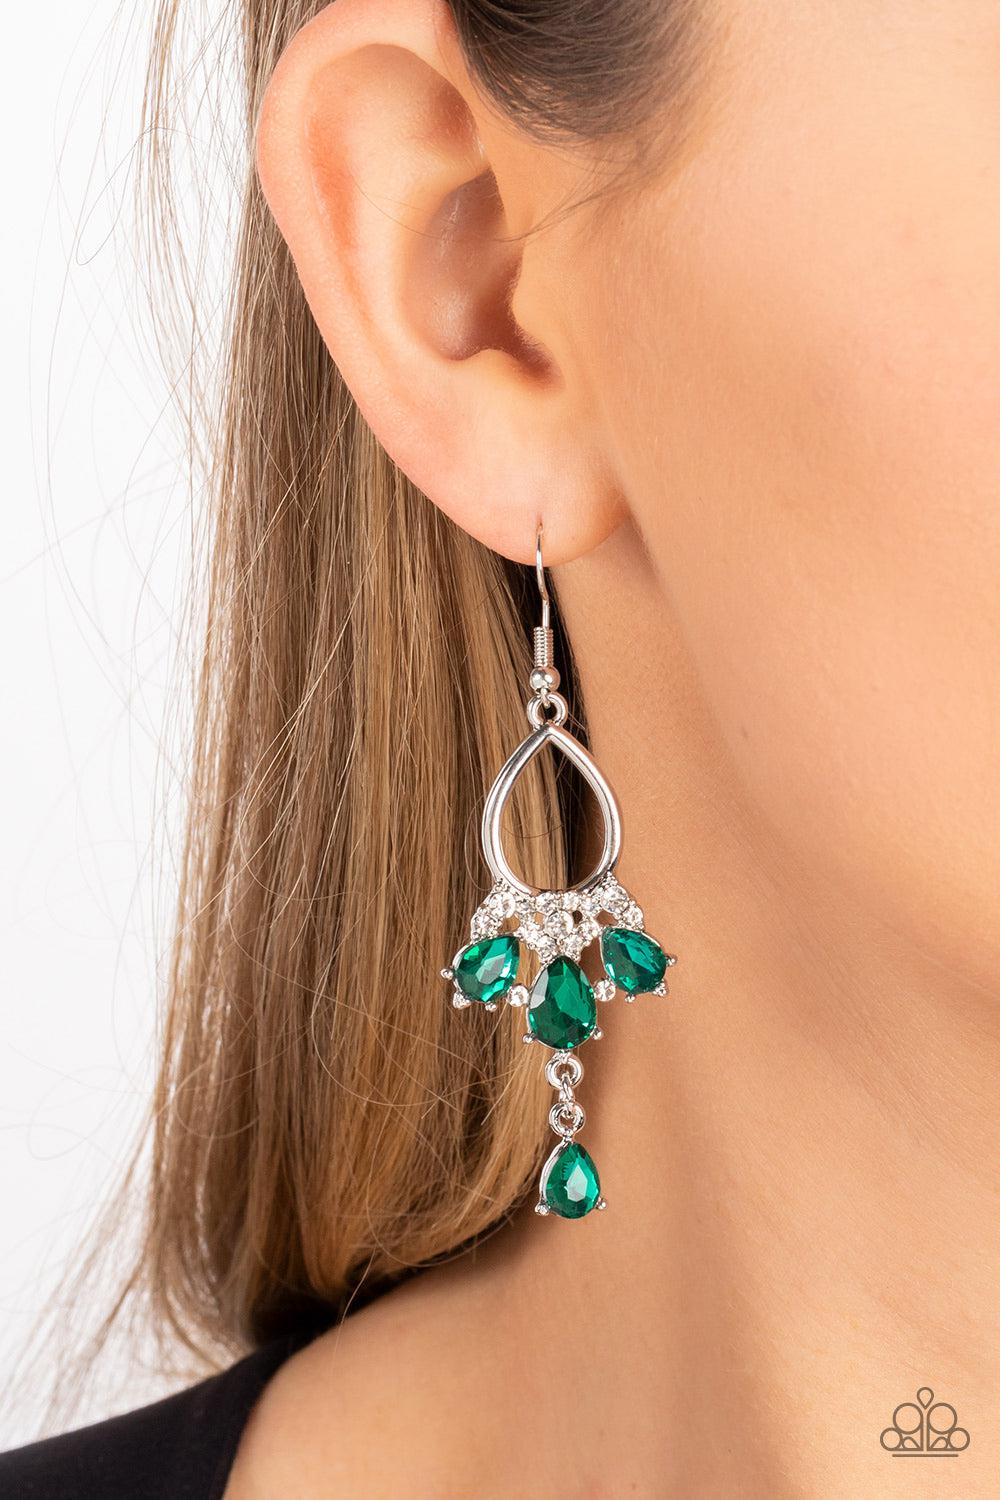 Coming in Clutch Green Rhinestone Earrings - Paparazzi Accessories-on model - CarasShop.com - $5 Jewelry by Cara Jewels